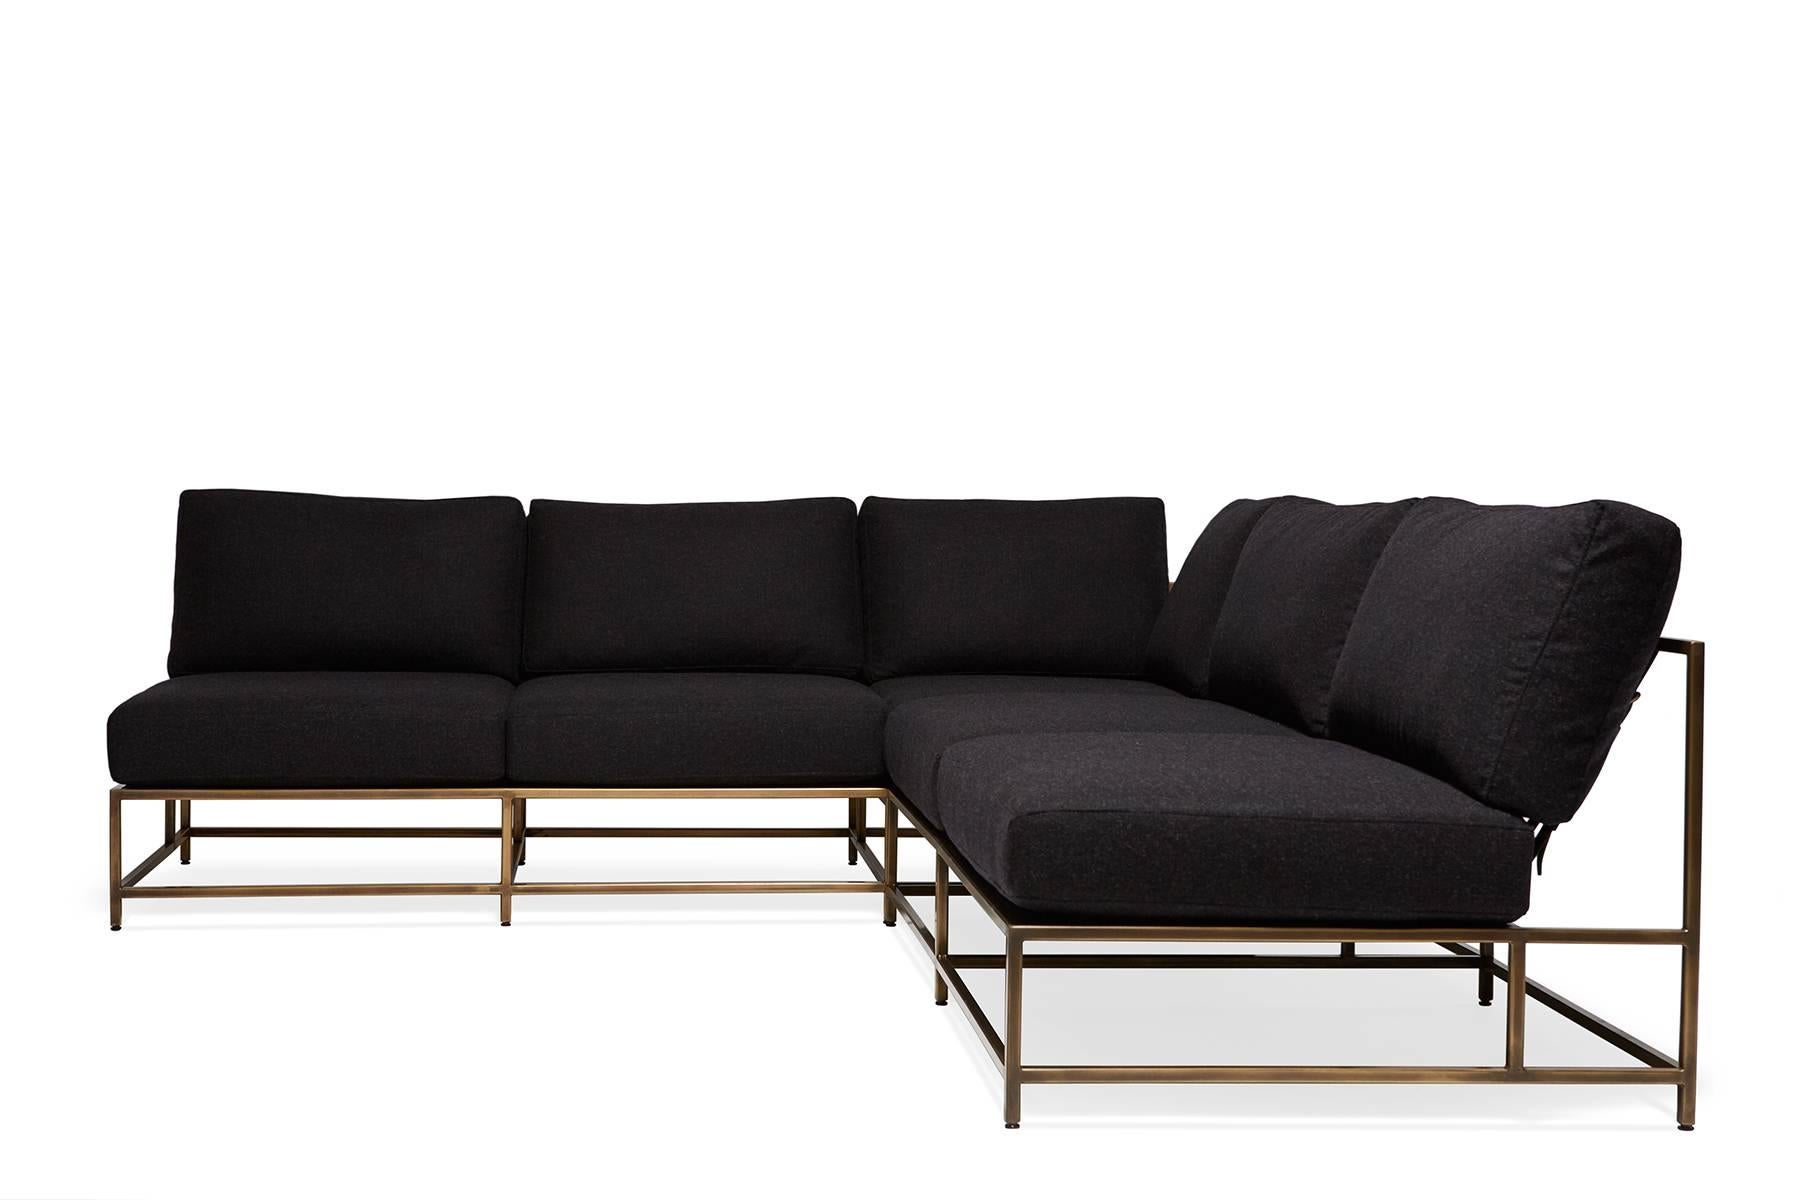 A larger sectional style piece with open sides, an antique brass frame finish and charcoal wool blend upholstery. This item can function as three independent pieces, lined up to create an extra long sofa, or be placed together as a larger L-shaped